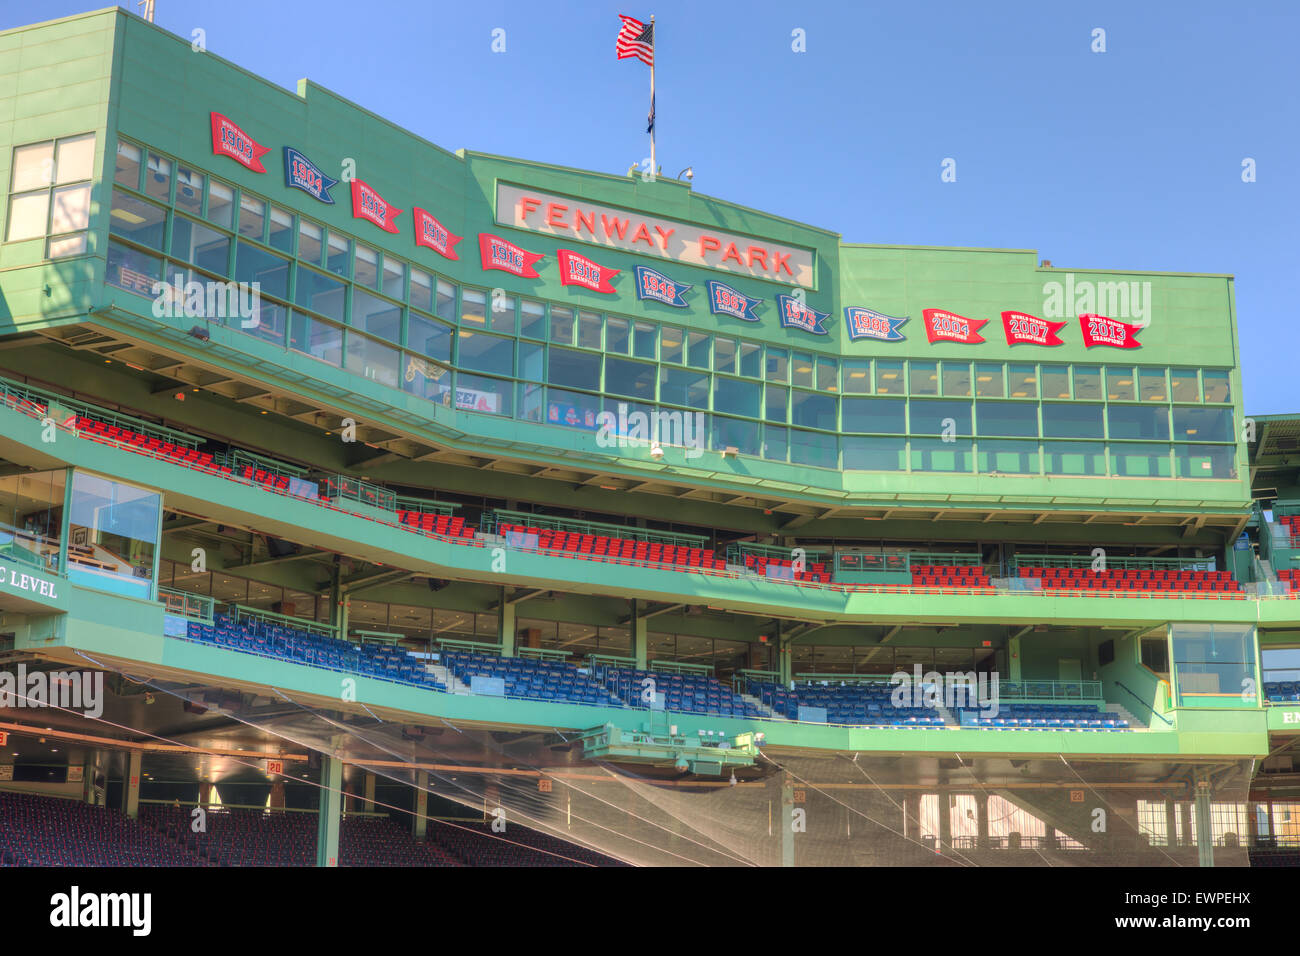 The press box behind home plate in iconic Fenway Park in Boston, Massachusetts. Stock Photo